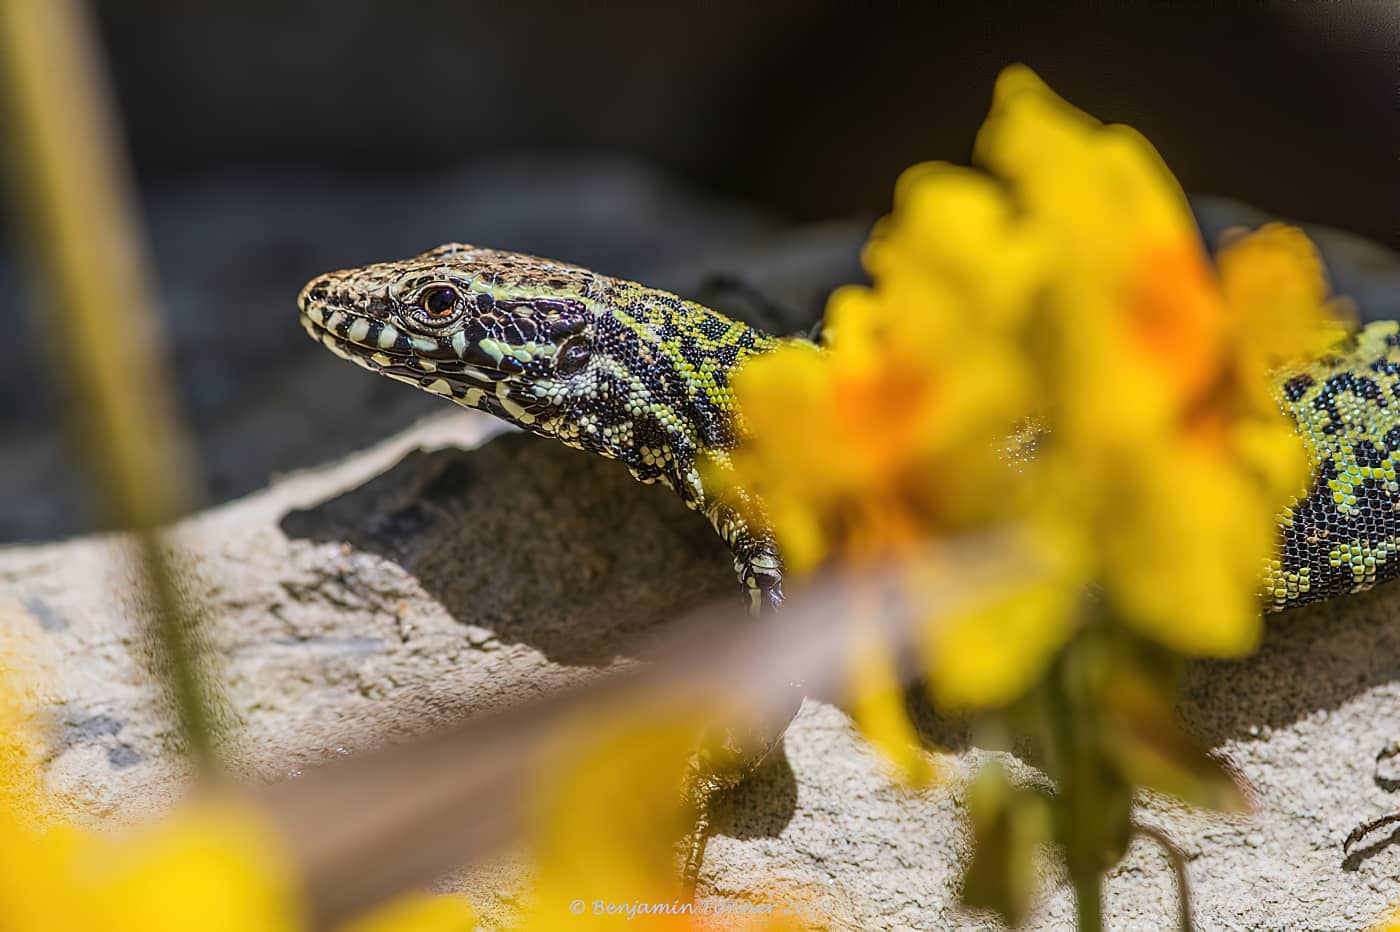 Ventnor Wall Lizard and yellow flower